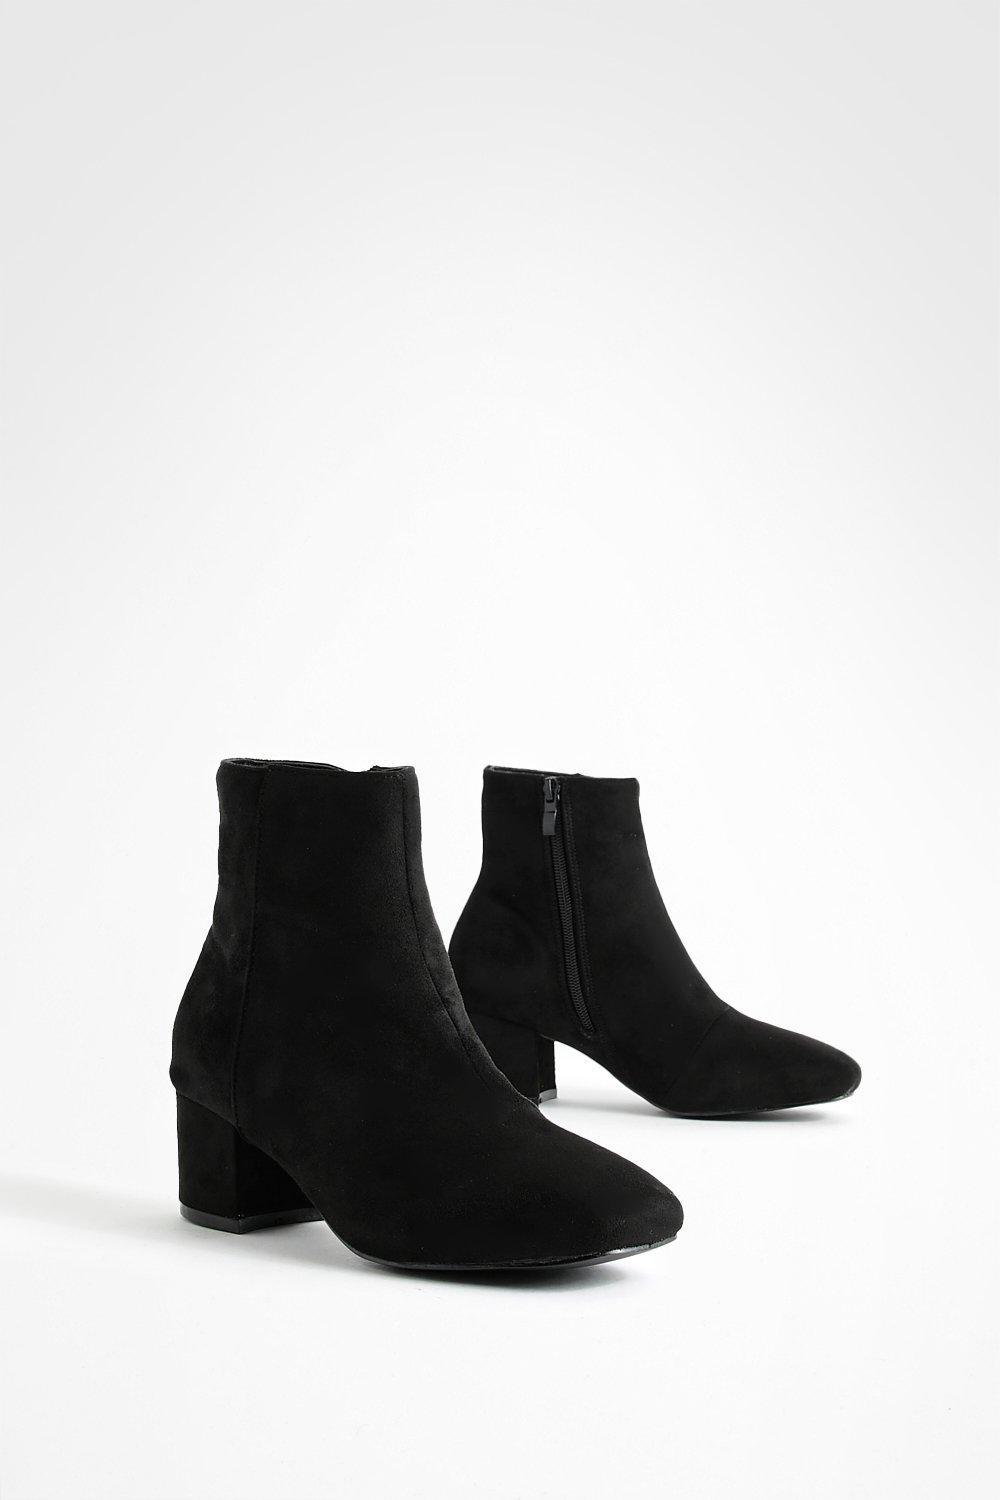 Stiletto Heel Pointed Toe Ankle Boots | boohoo